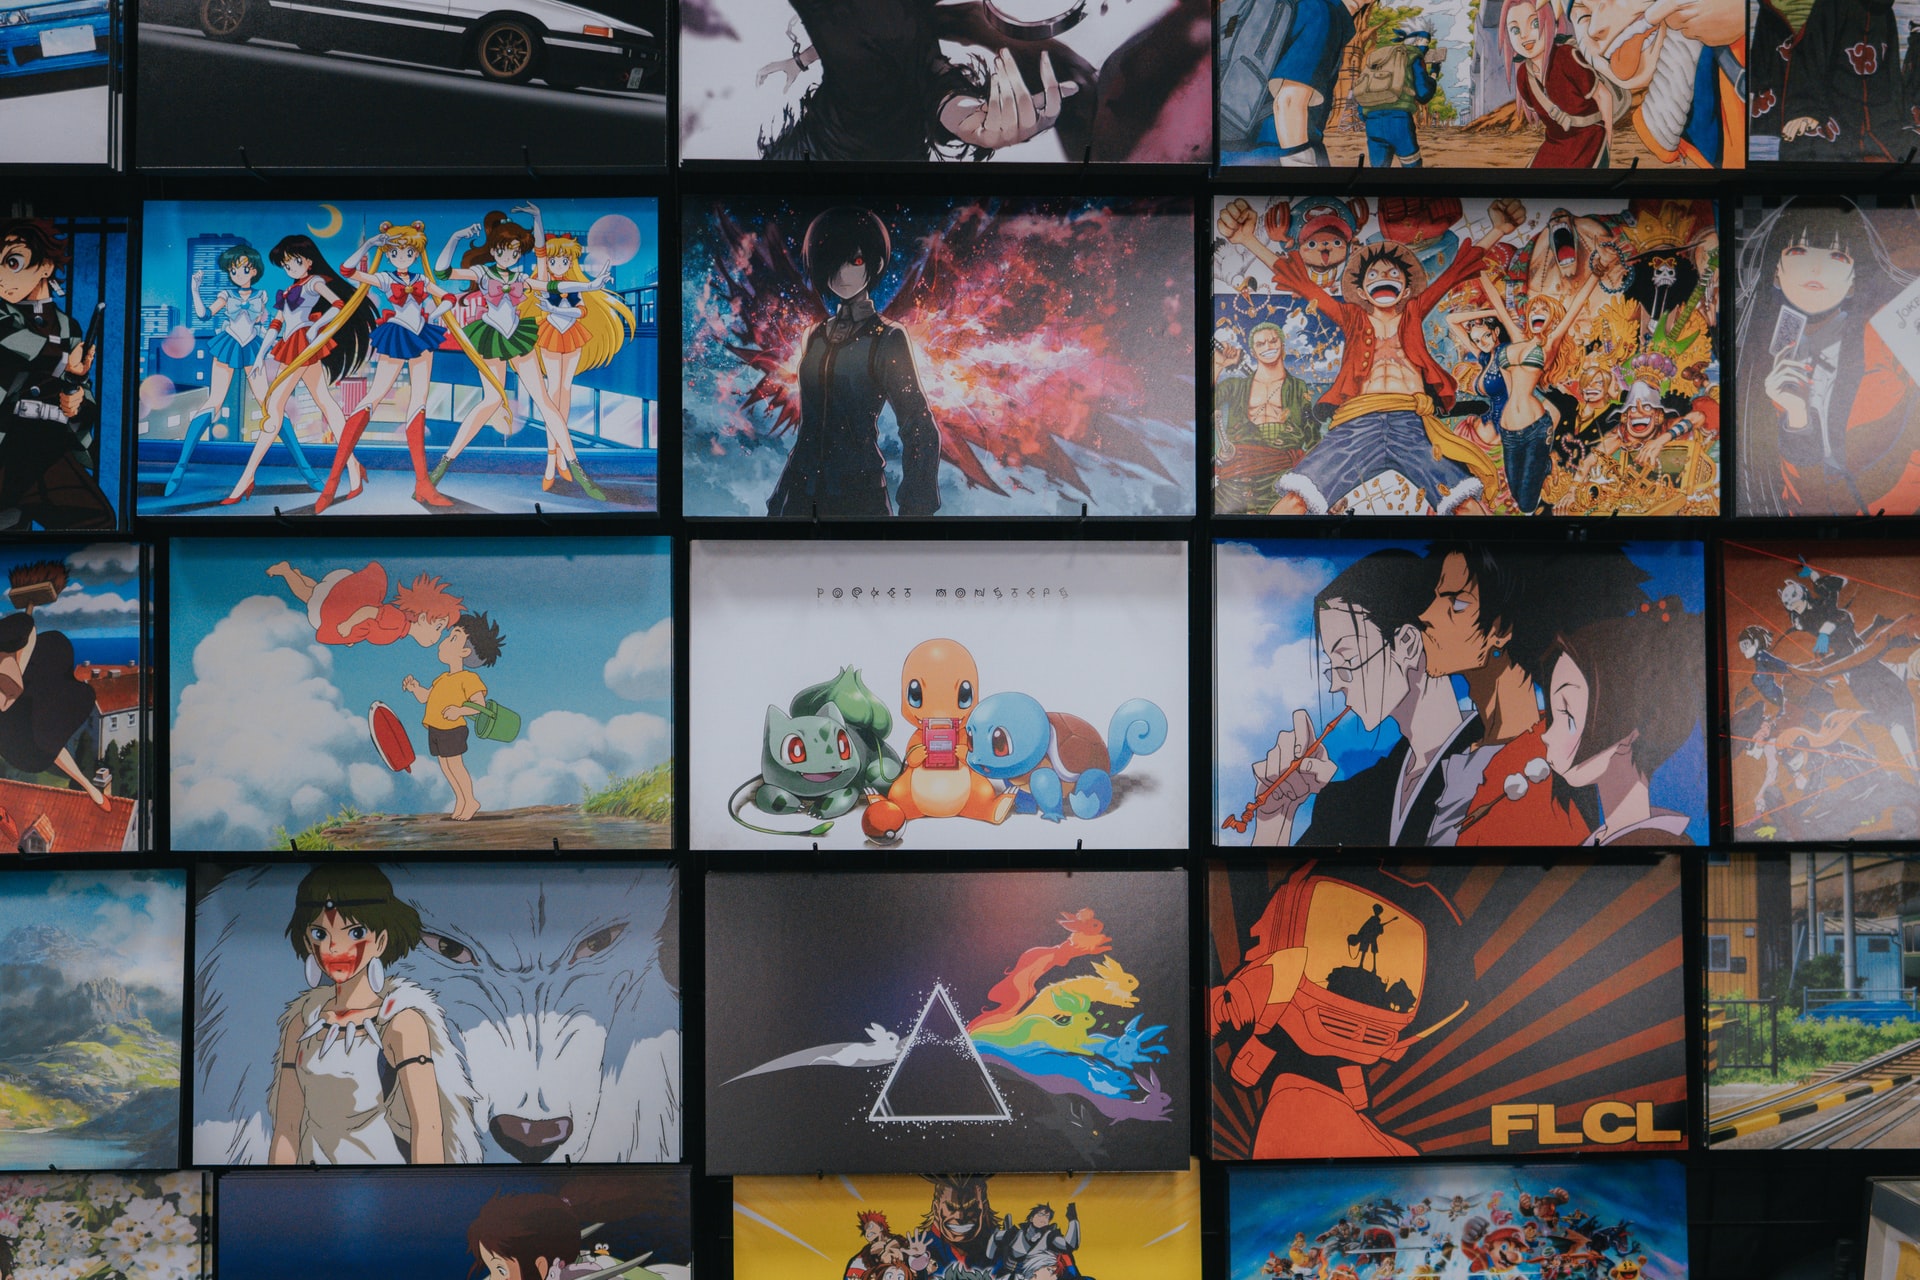 Eastern Entertainment Domination: the Growth of Anime in the West